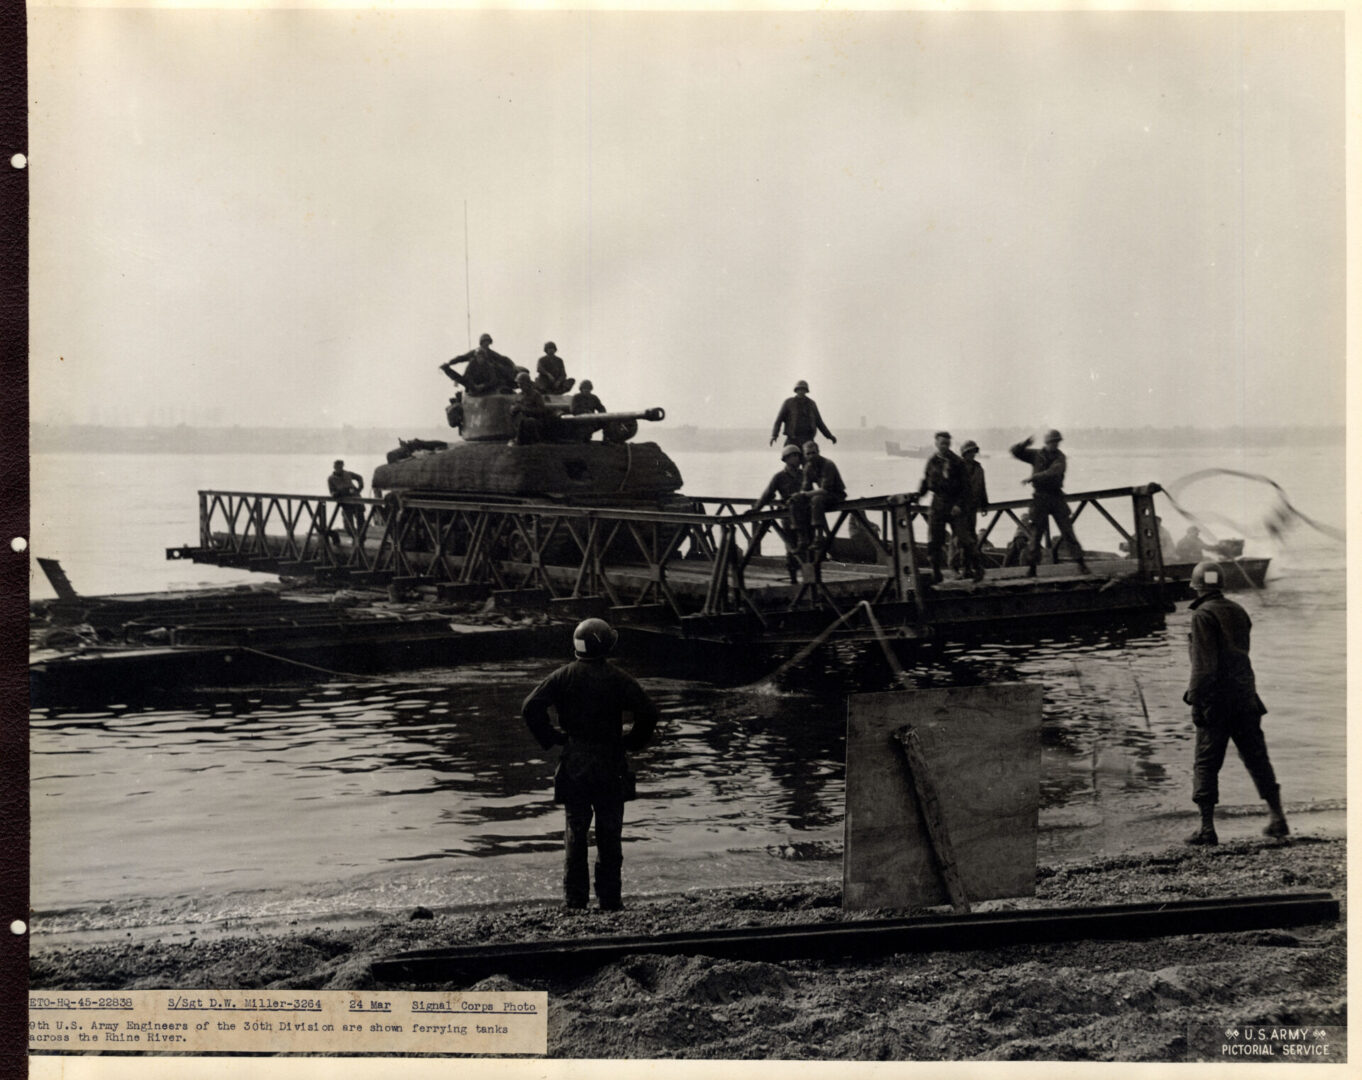 Assault boats used to ferry tanks across the Rhine